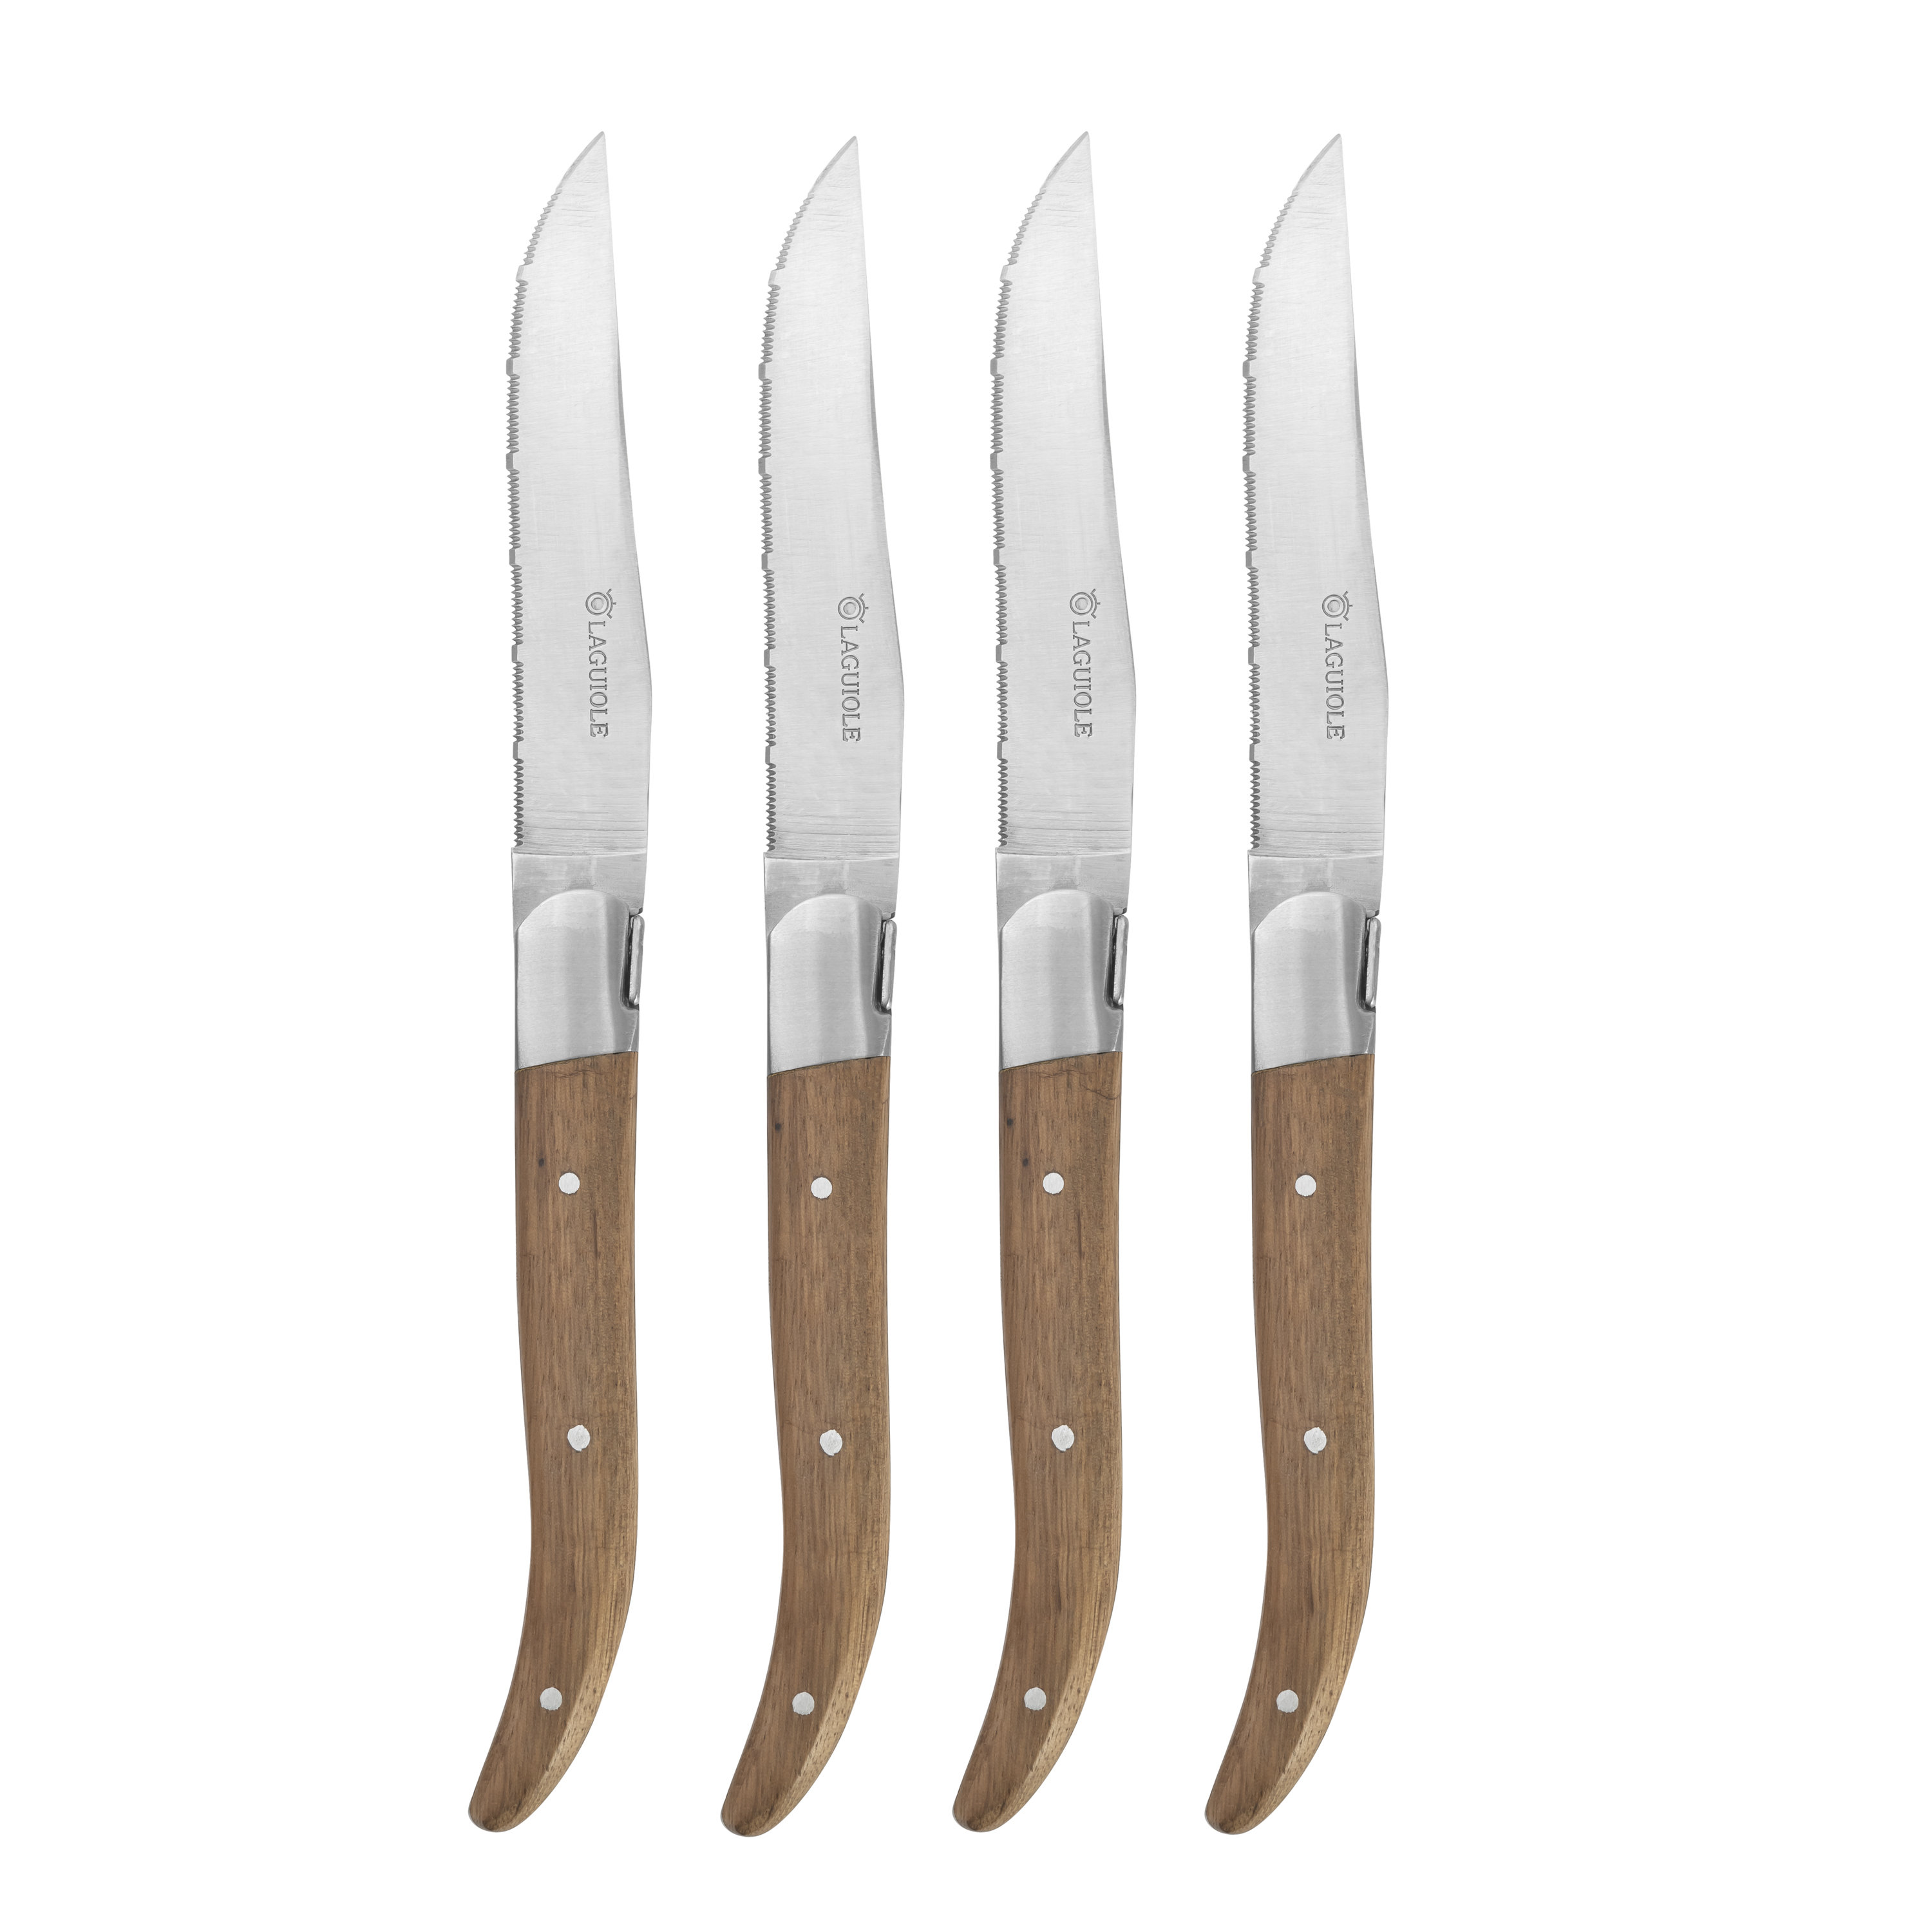 French Home Laguiole Steak Knives, Stainless Steel - 4 count